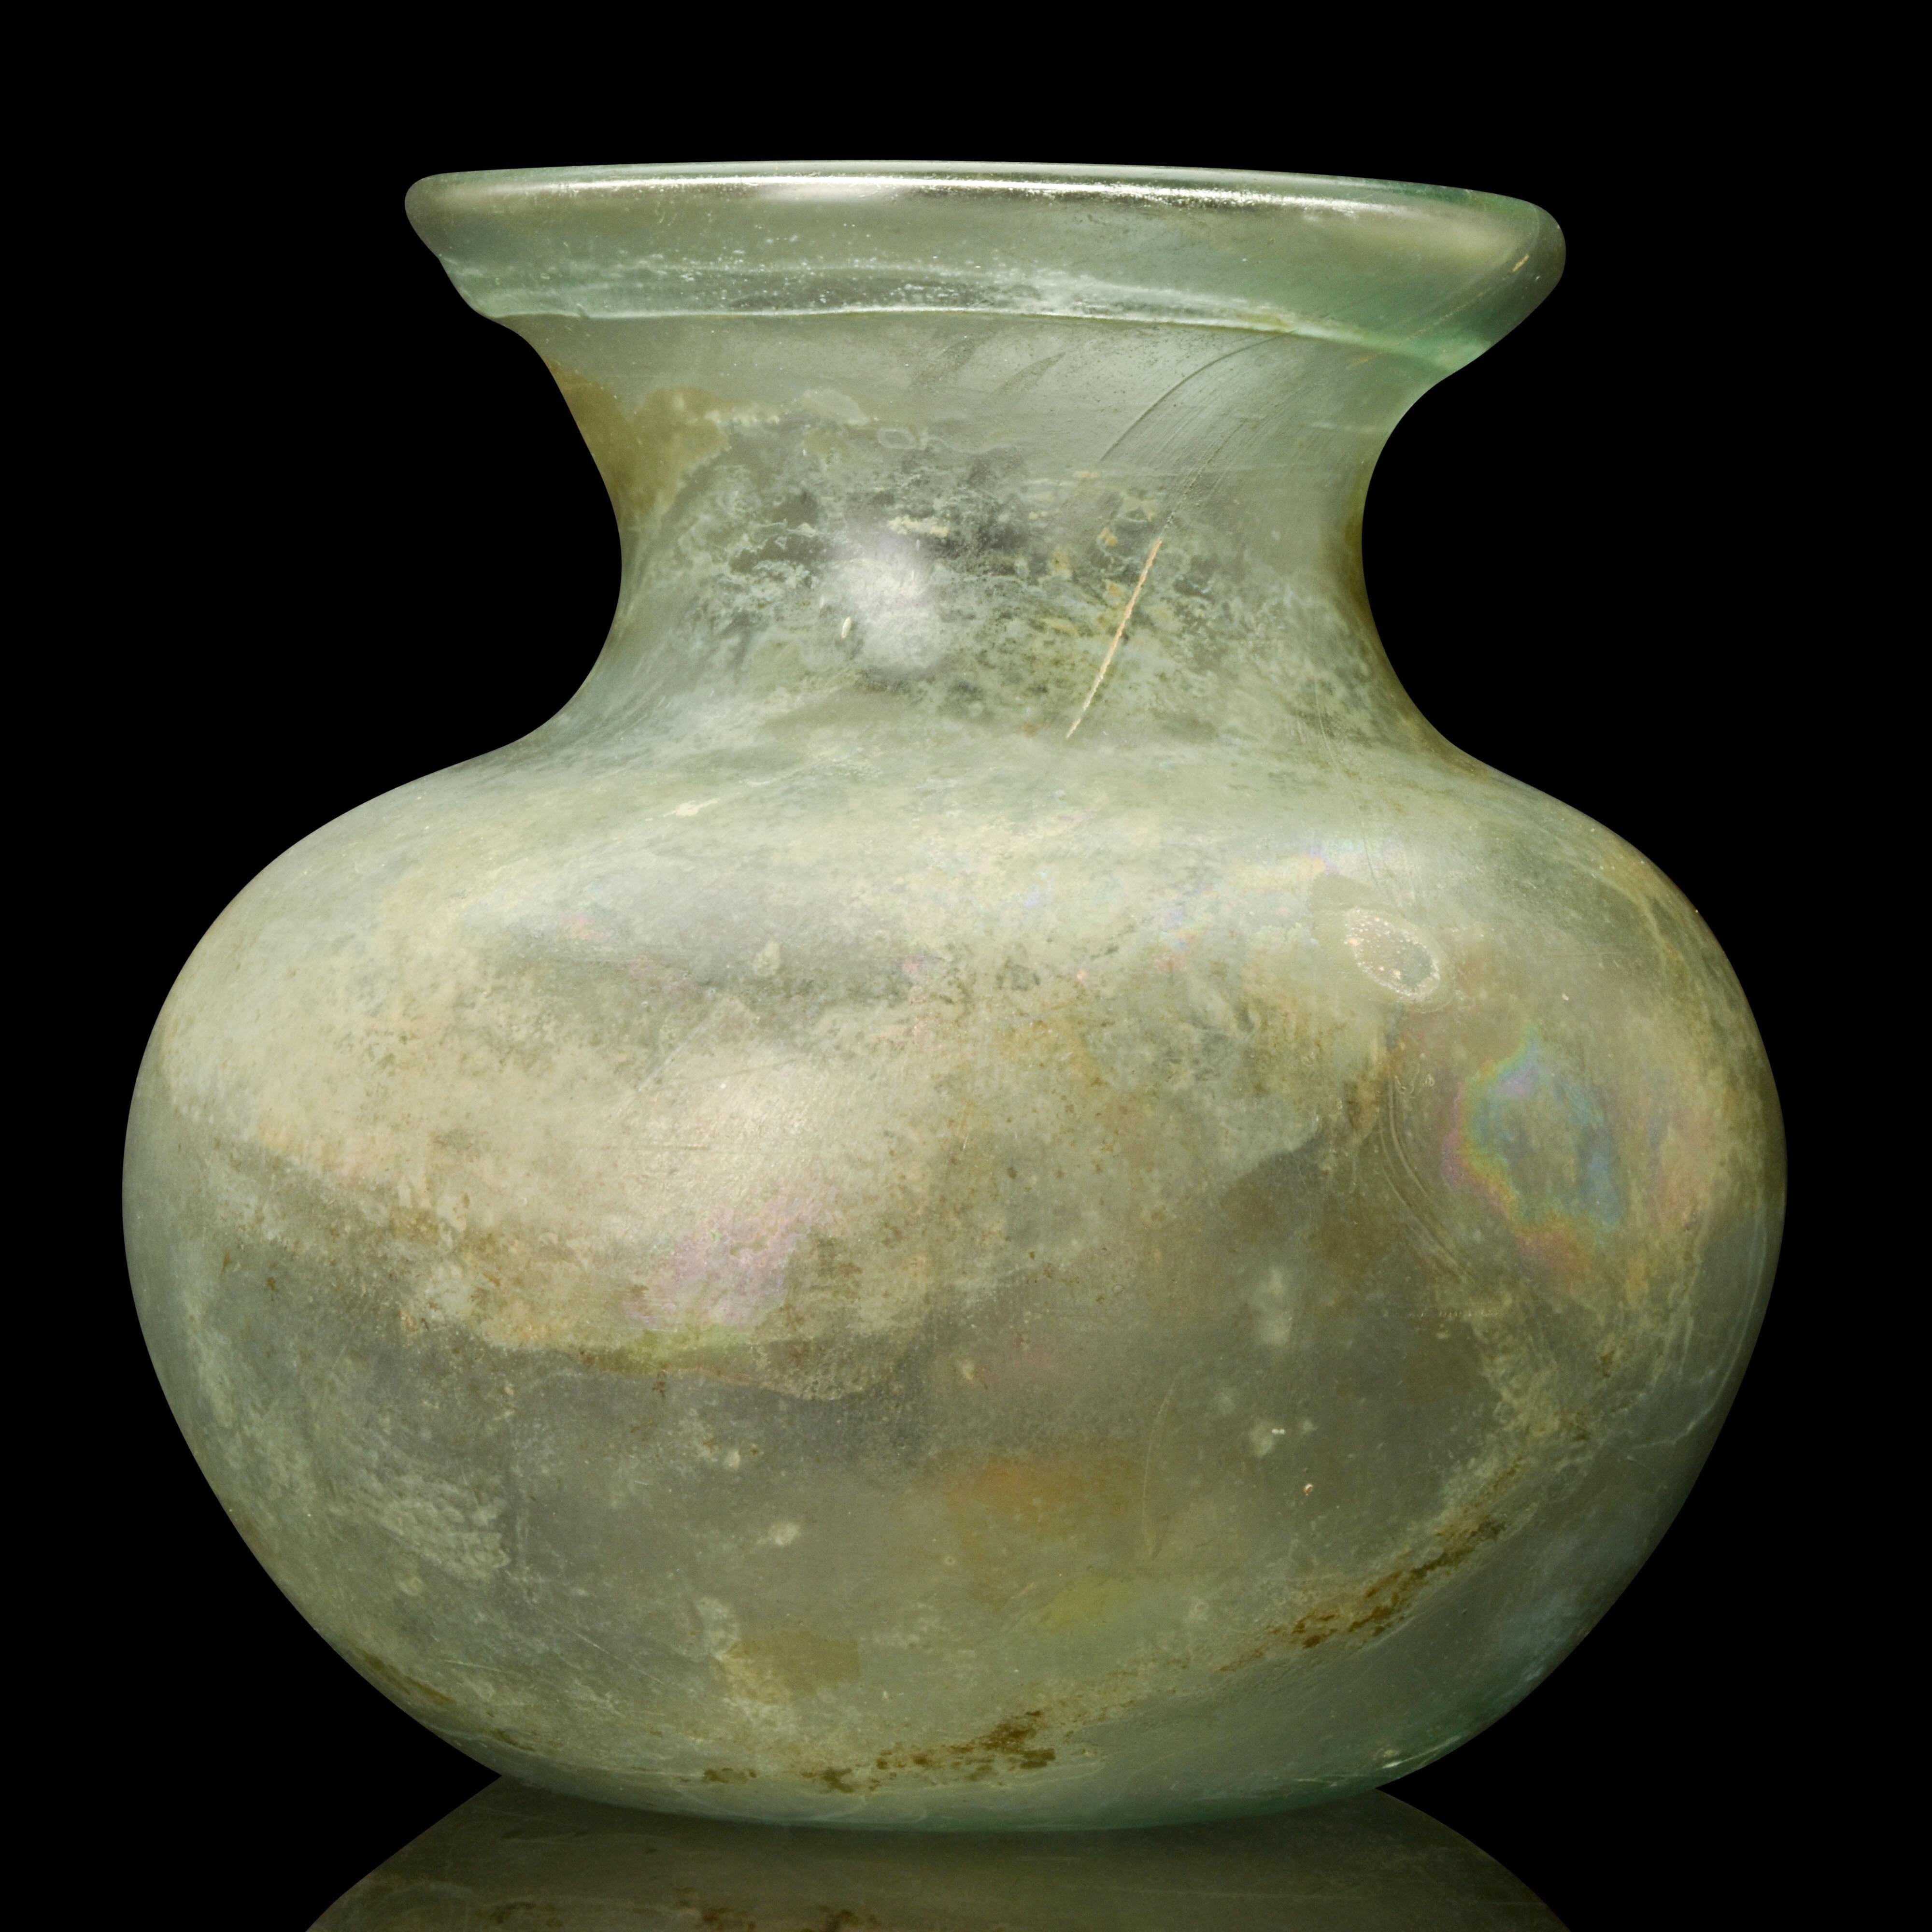 A beautiful Roman translucent glass jar, with a light blue-green tinge. It has a thick, splayed rim that is folded over and into a short, concave neck. The body is squat and bulbous, with a slightly pushed-in bottom. Throughout the vessel, there are